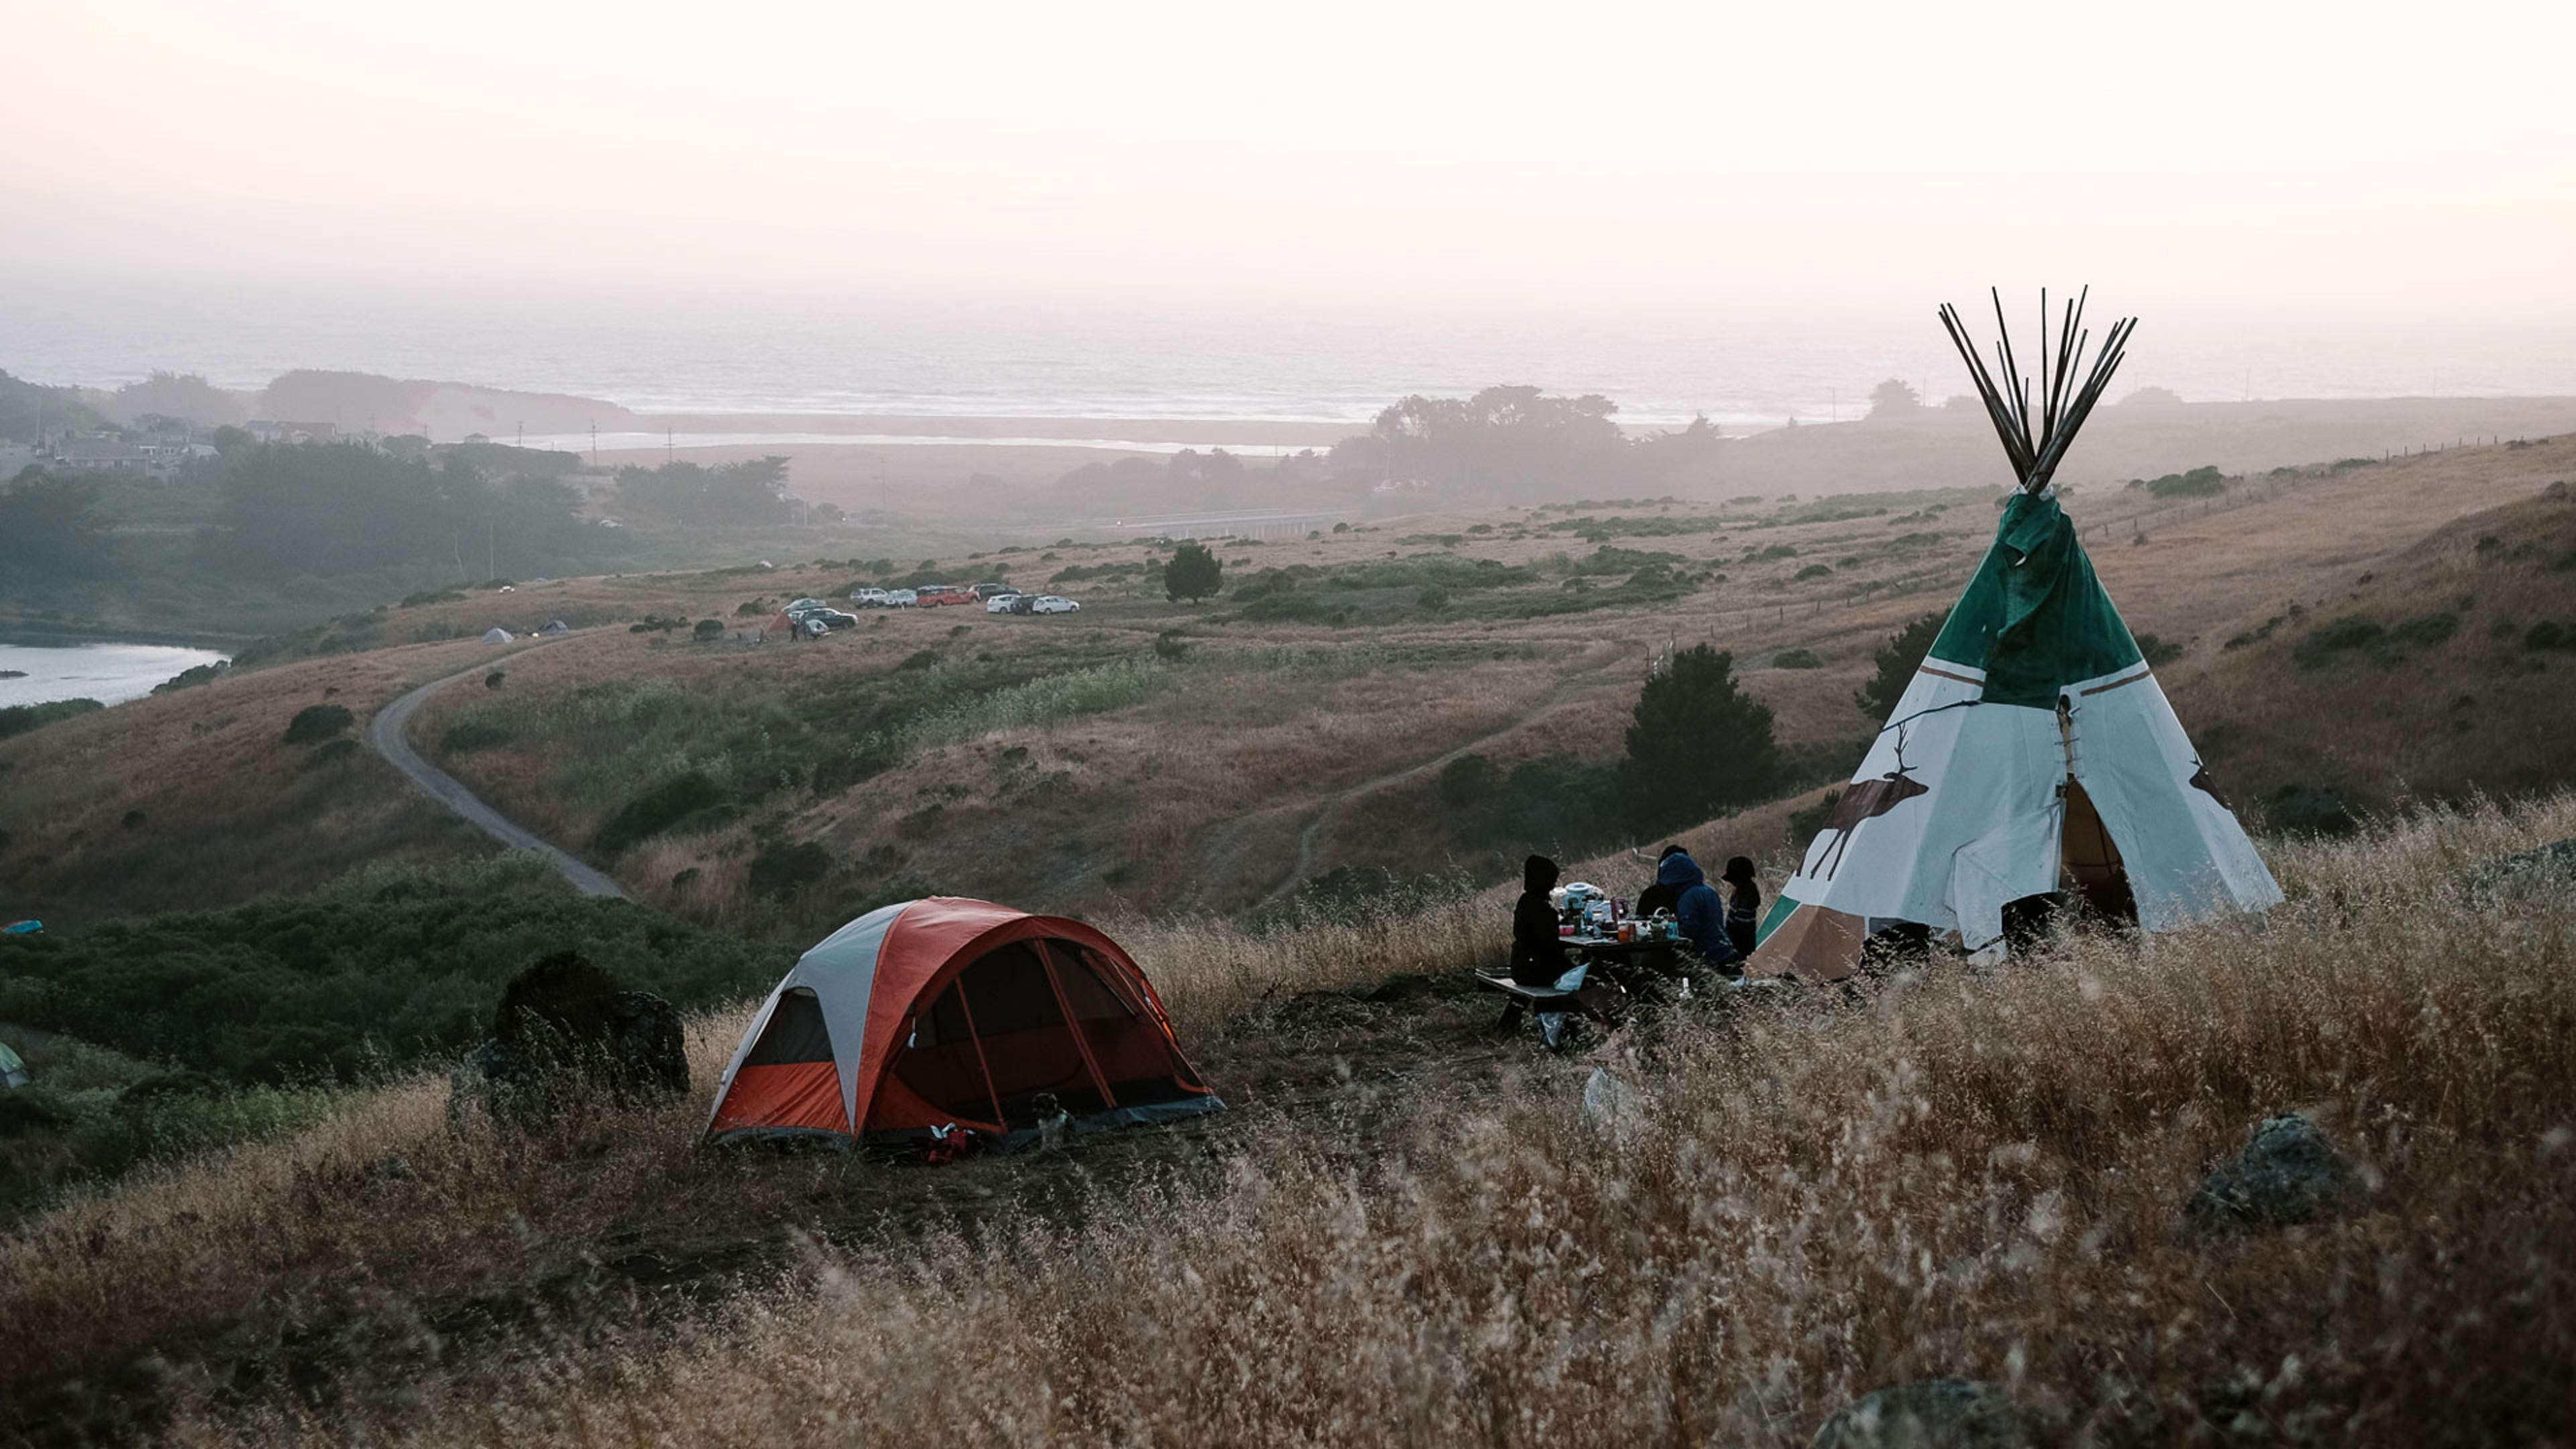 Hipcamp, The Airbnb Of Camping, Is Changing Flyover Country Into A Big Welcome Mat